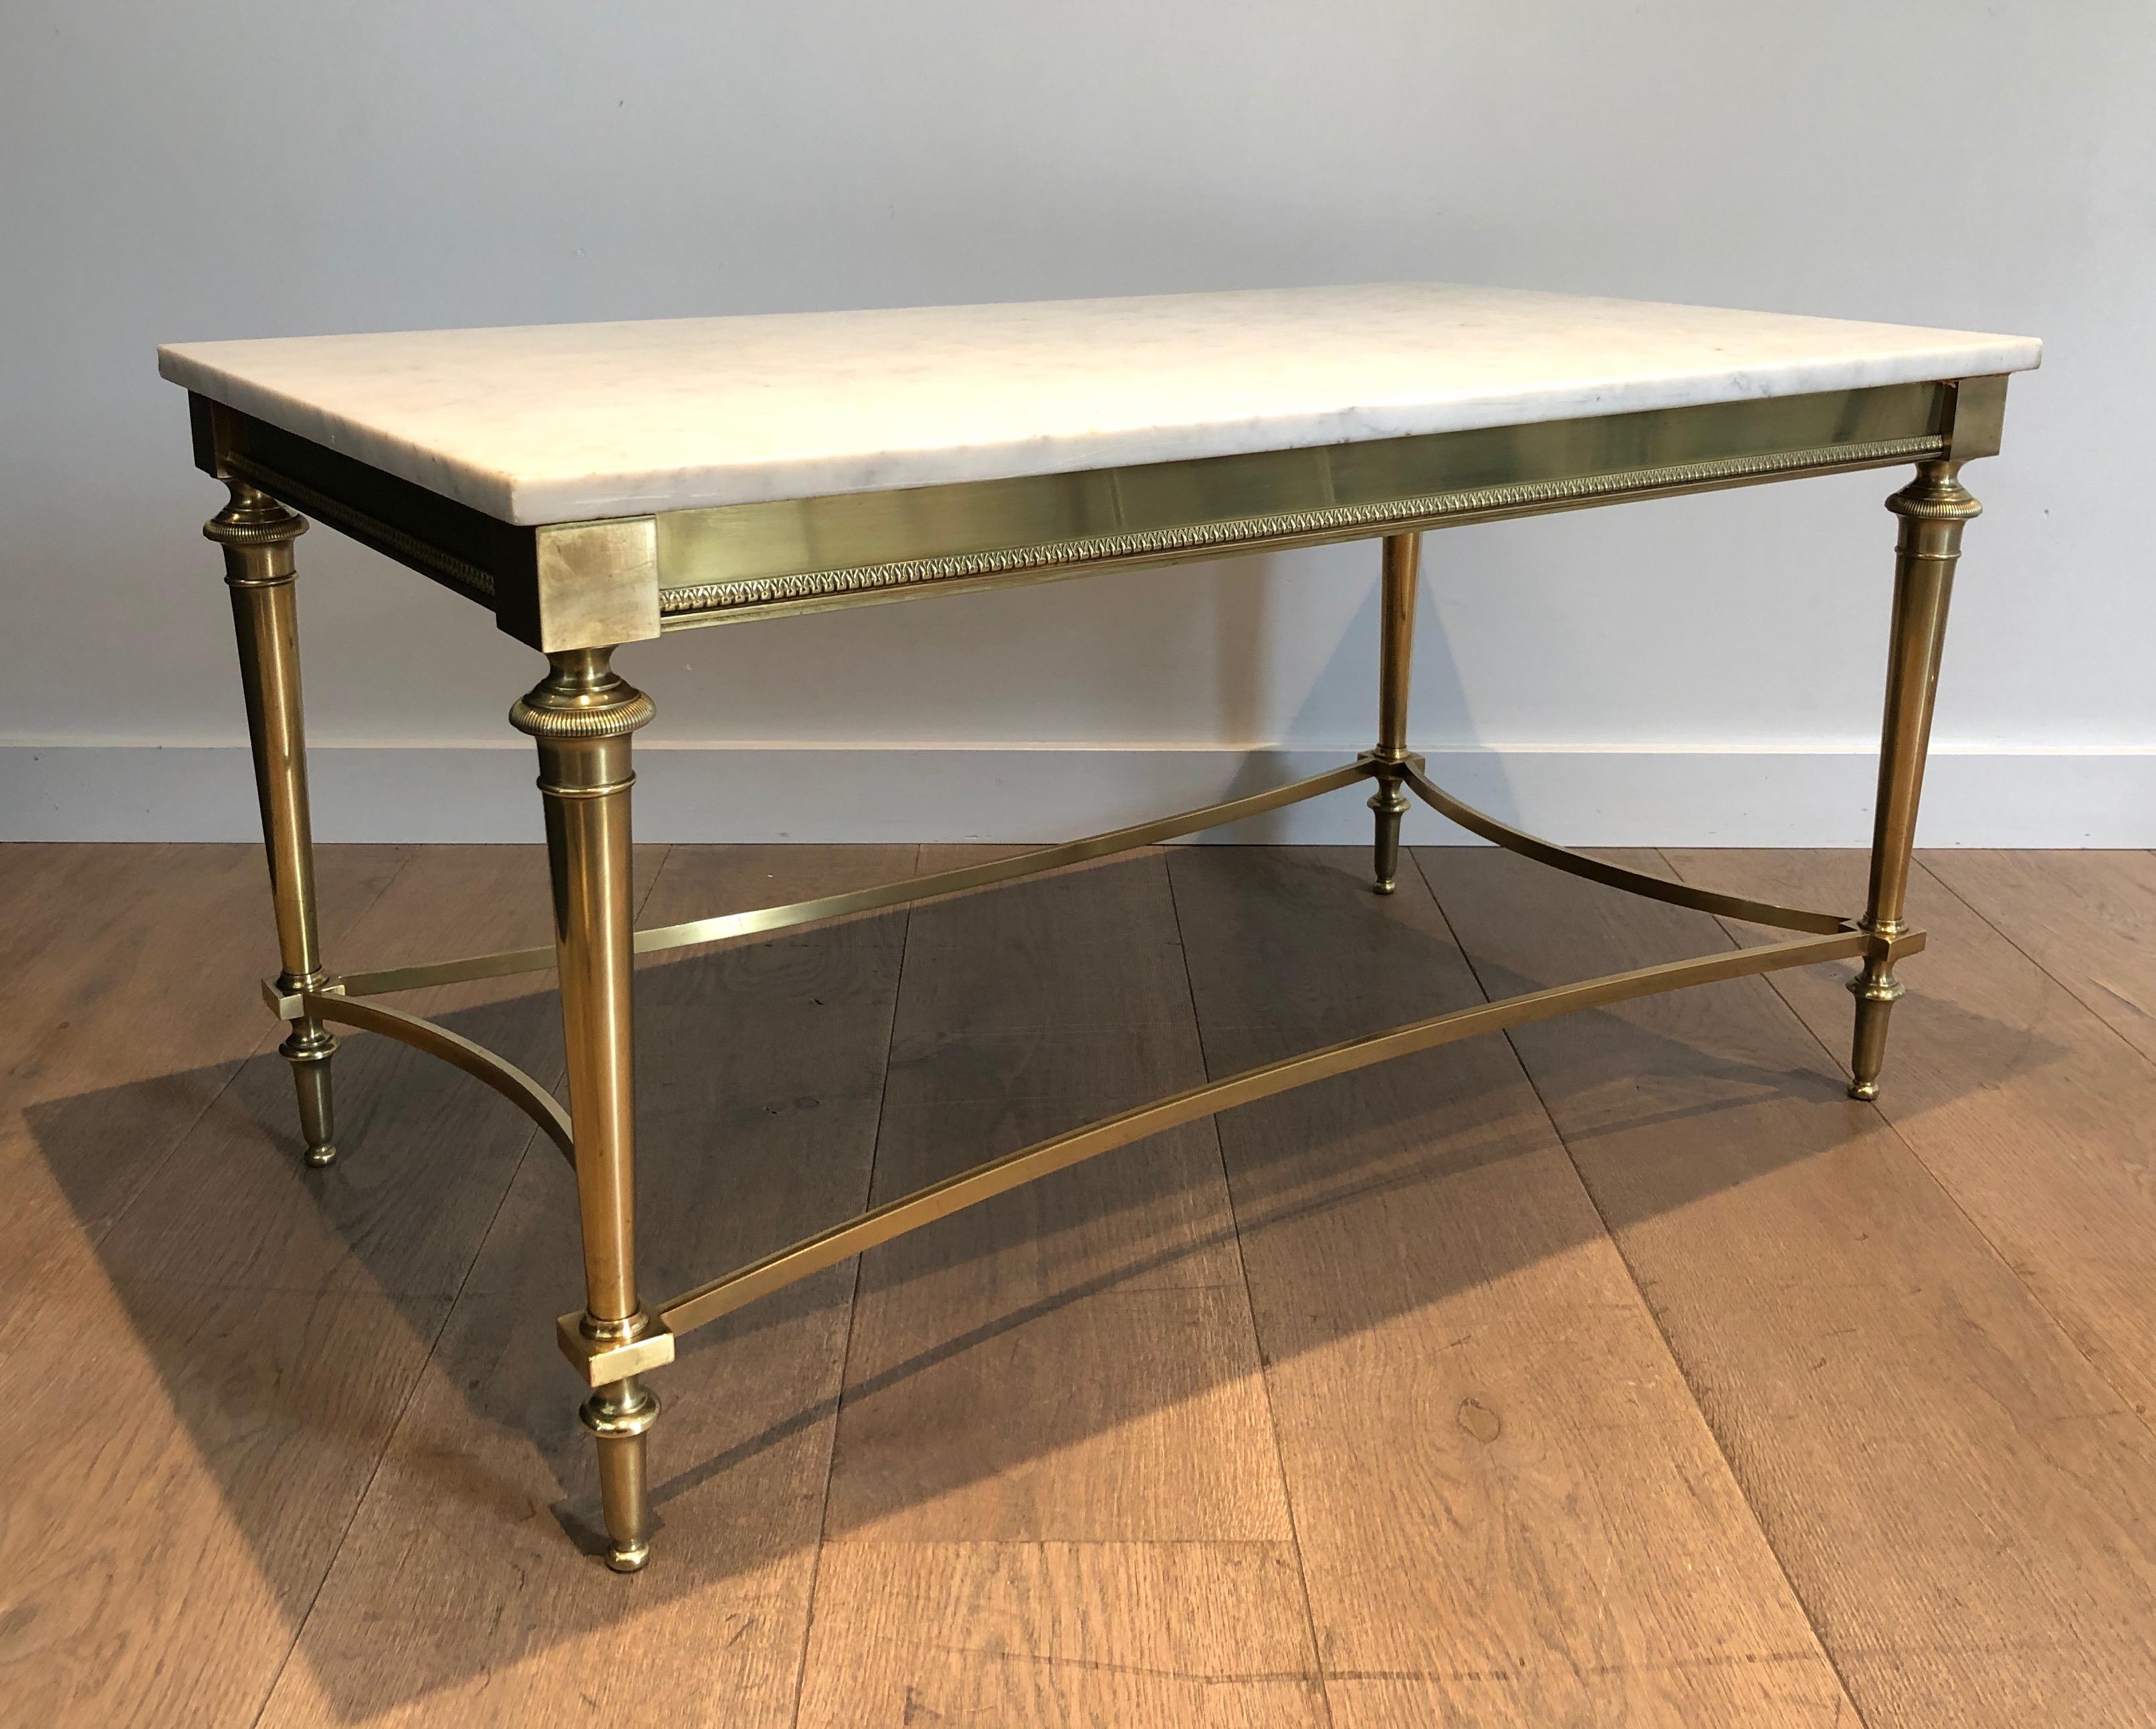 This exceptional neoclassical style coffee table is made of brass with white Carrara marble top. This is a French work by famous designer Maison Ramsay. Circa 1940